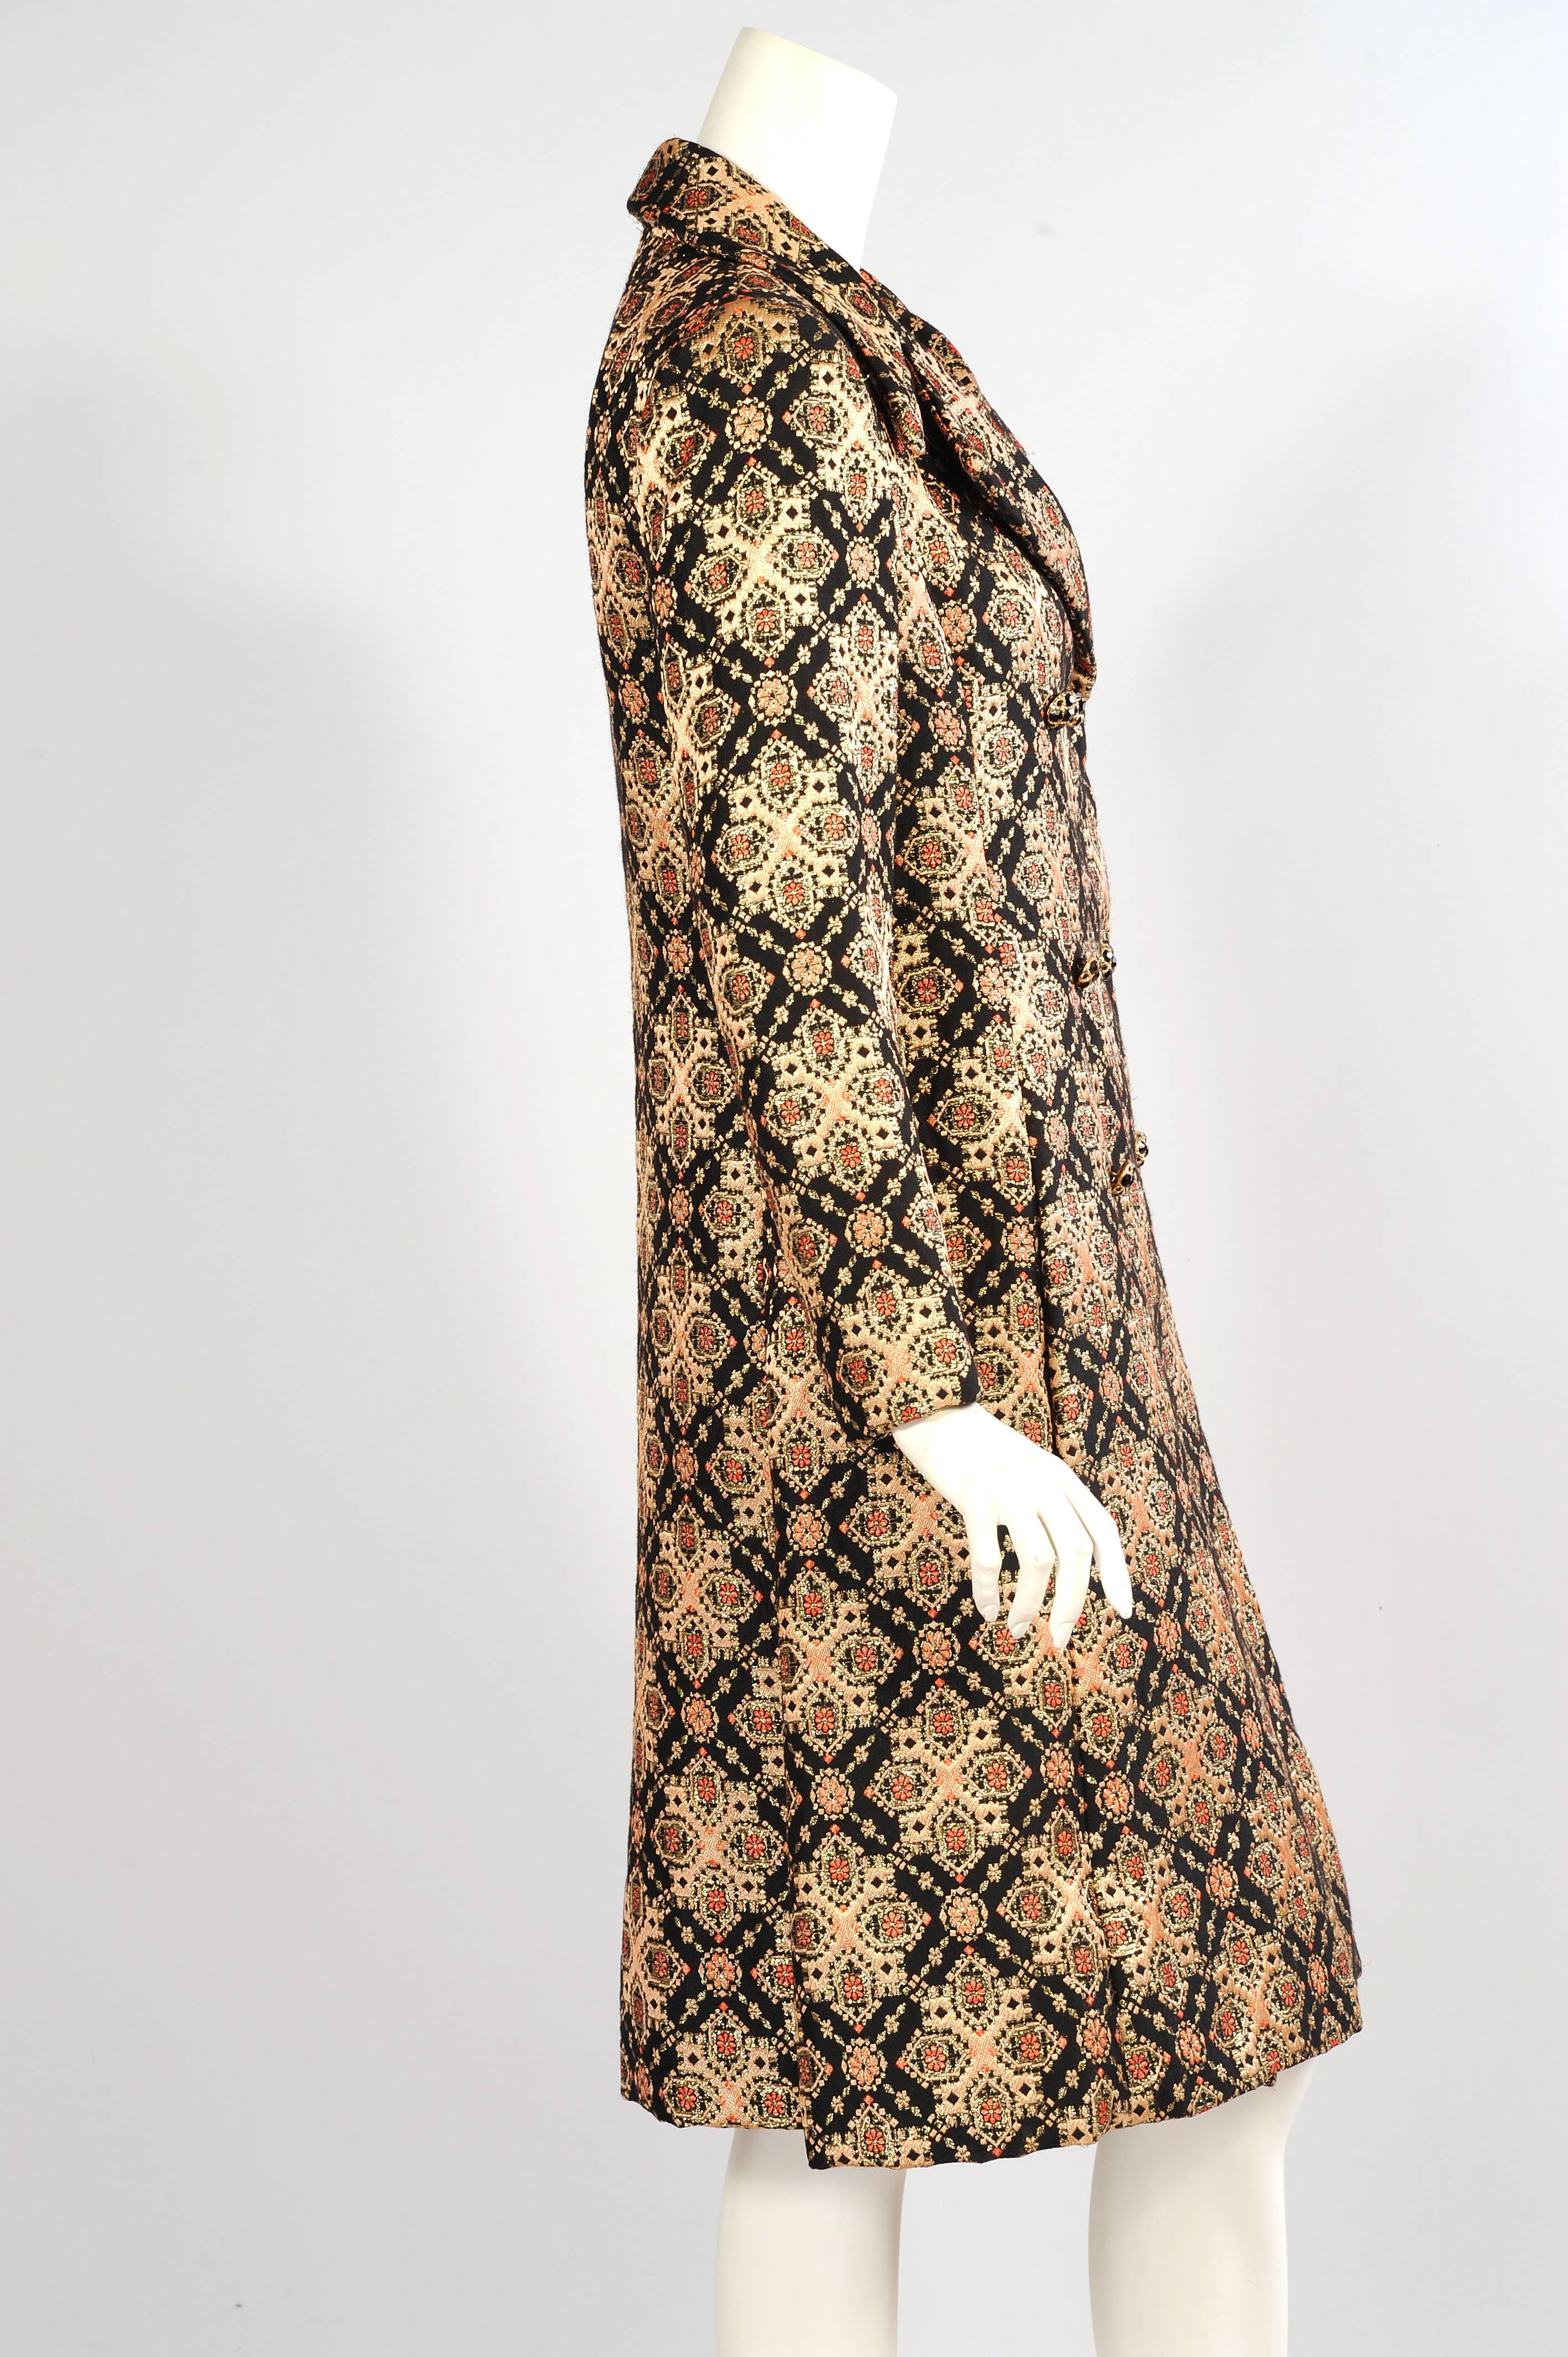 Brown Malcolm Starr Woven Black Peach Coral and Gold Lame Coat, 1960s 